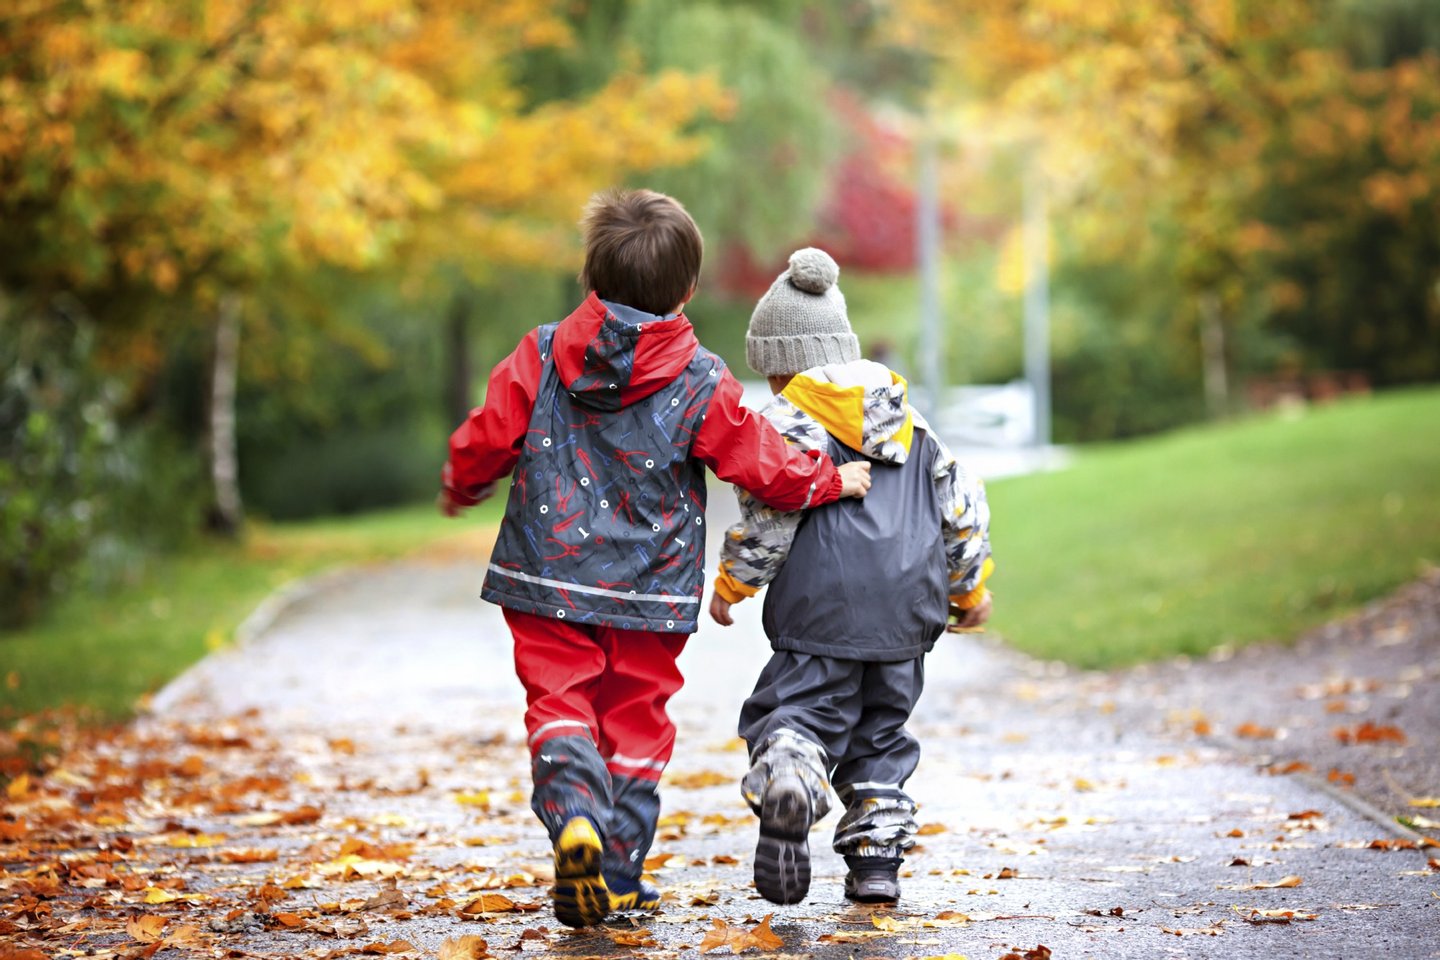 angry, autumn, background, blue, boots, boy, casual, caucasian, childhood, children, colorful, competition, cute, drops, fall, family, fight, foliage, friendship, fun, green, hat, kids, leaves, little, park, path, people, person, plastic, play, pulling, rain, raincoats, red, rivalry, robot, sharing, siblings, together, toy, twins, two, wet, white, young, draw back, 